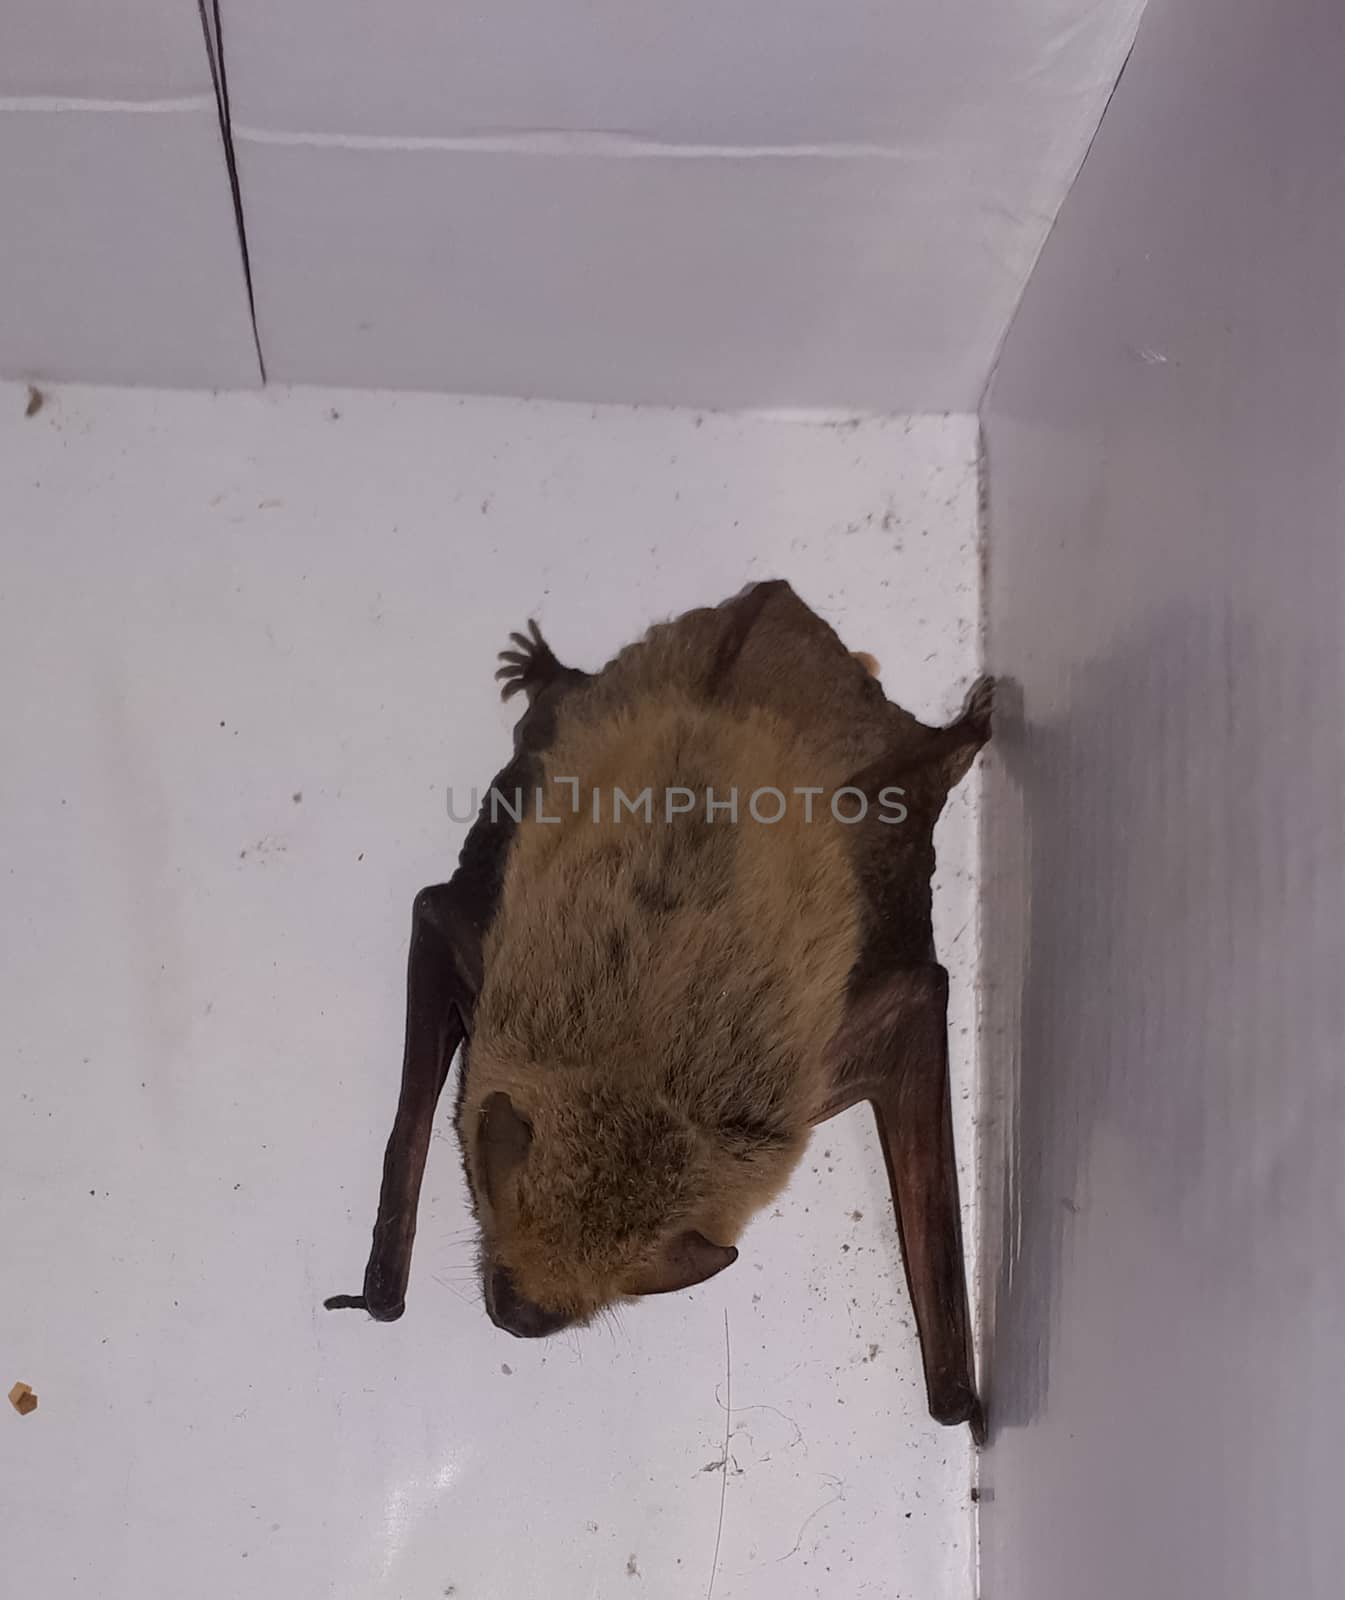 A bat is hiding in a corner of the room.